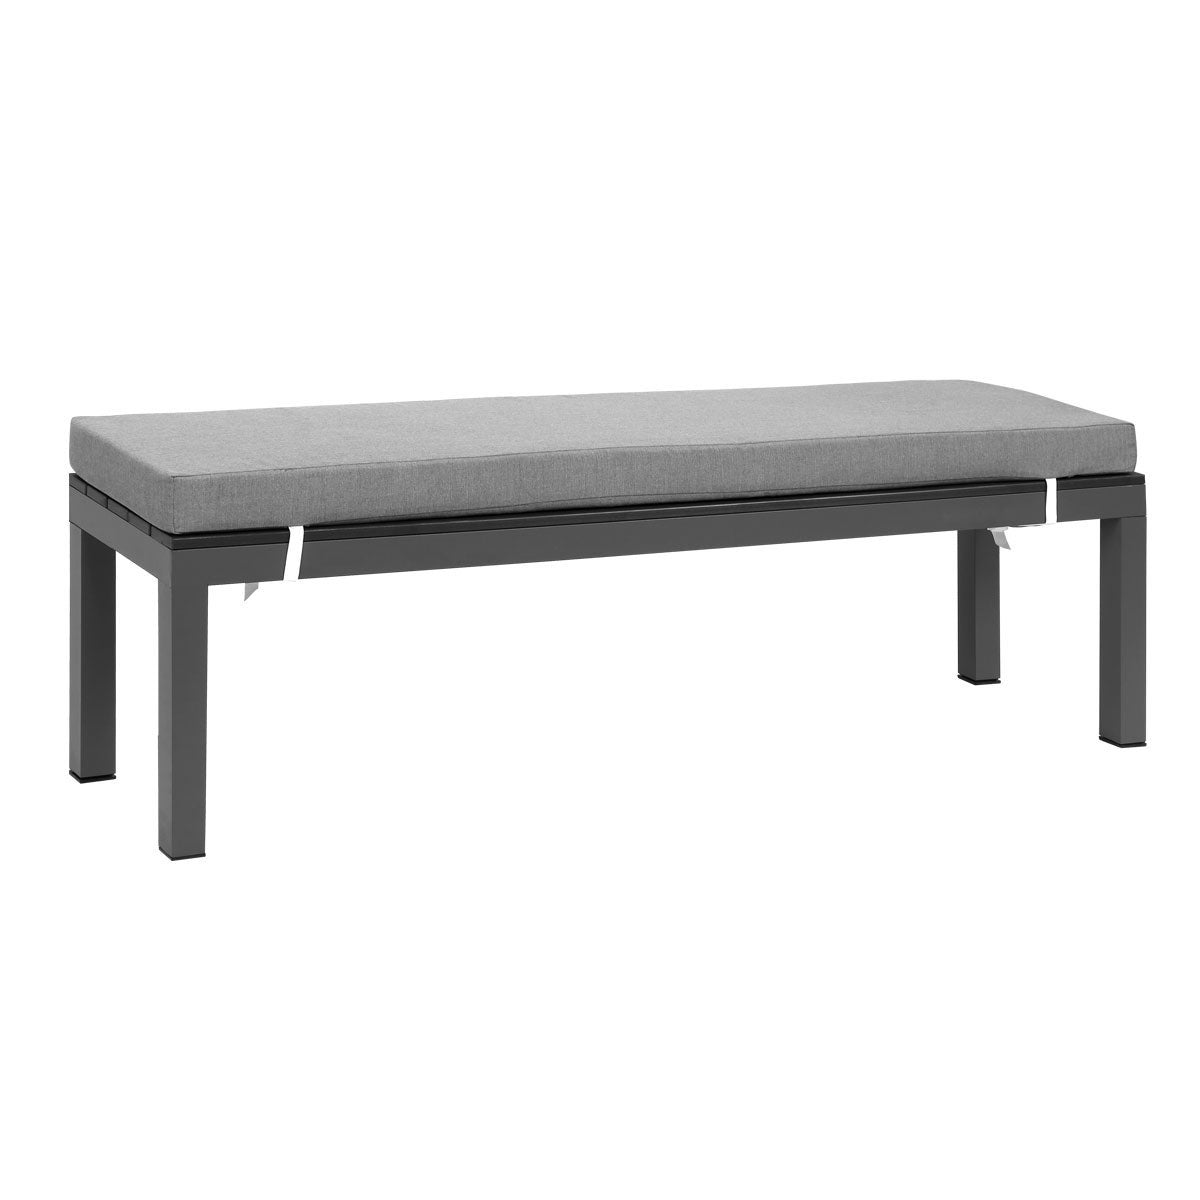 Manly Charcoal Aluminium Outdoor faux wood Top Bench with Grey Cushion (Set of Two)